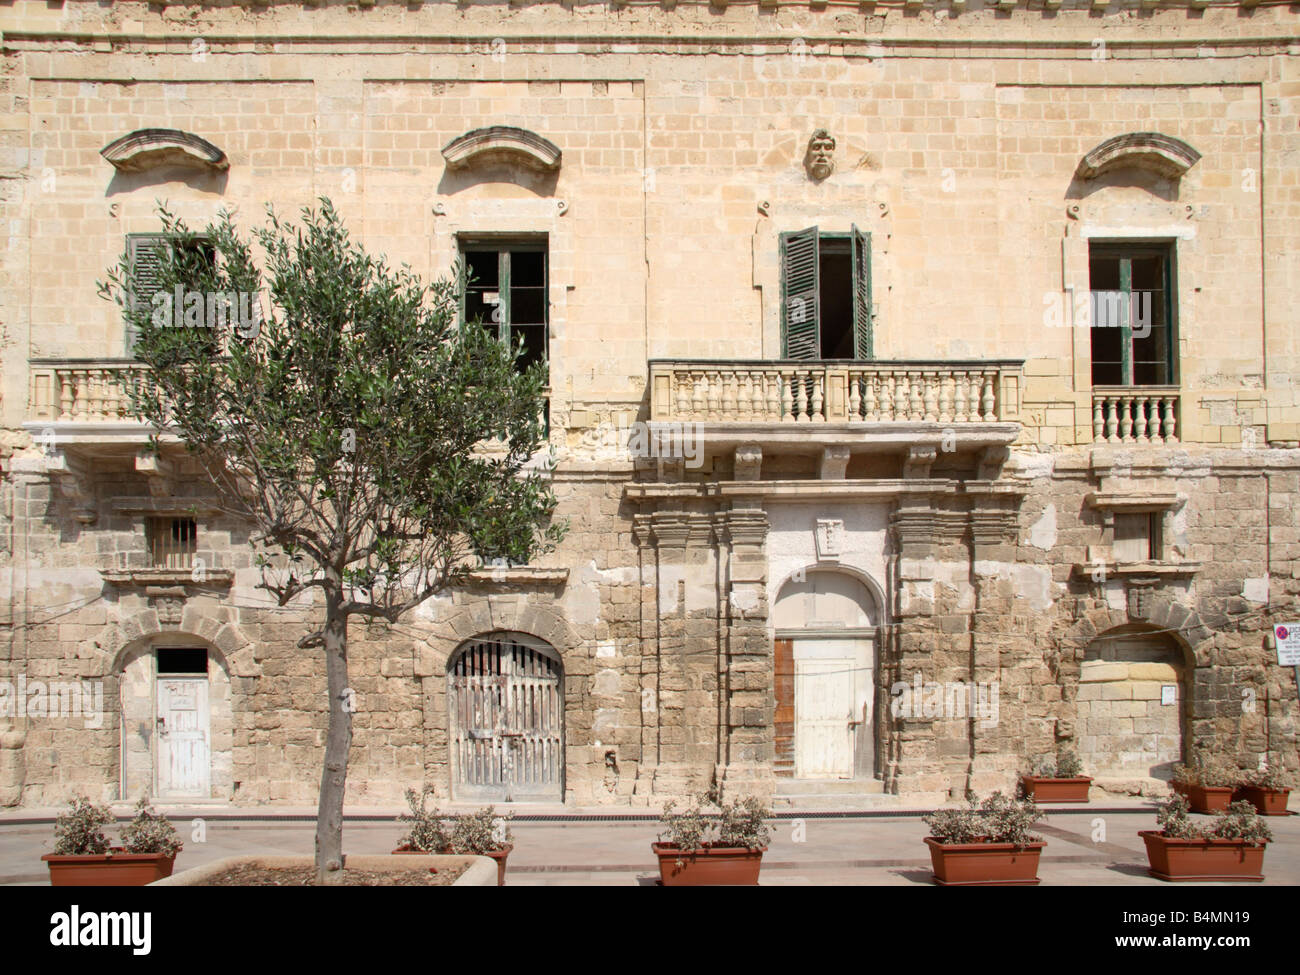 An old decaying building in Vittoriosa, Malta. Stock Photo